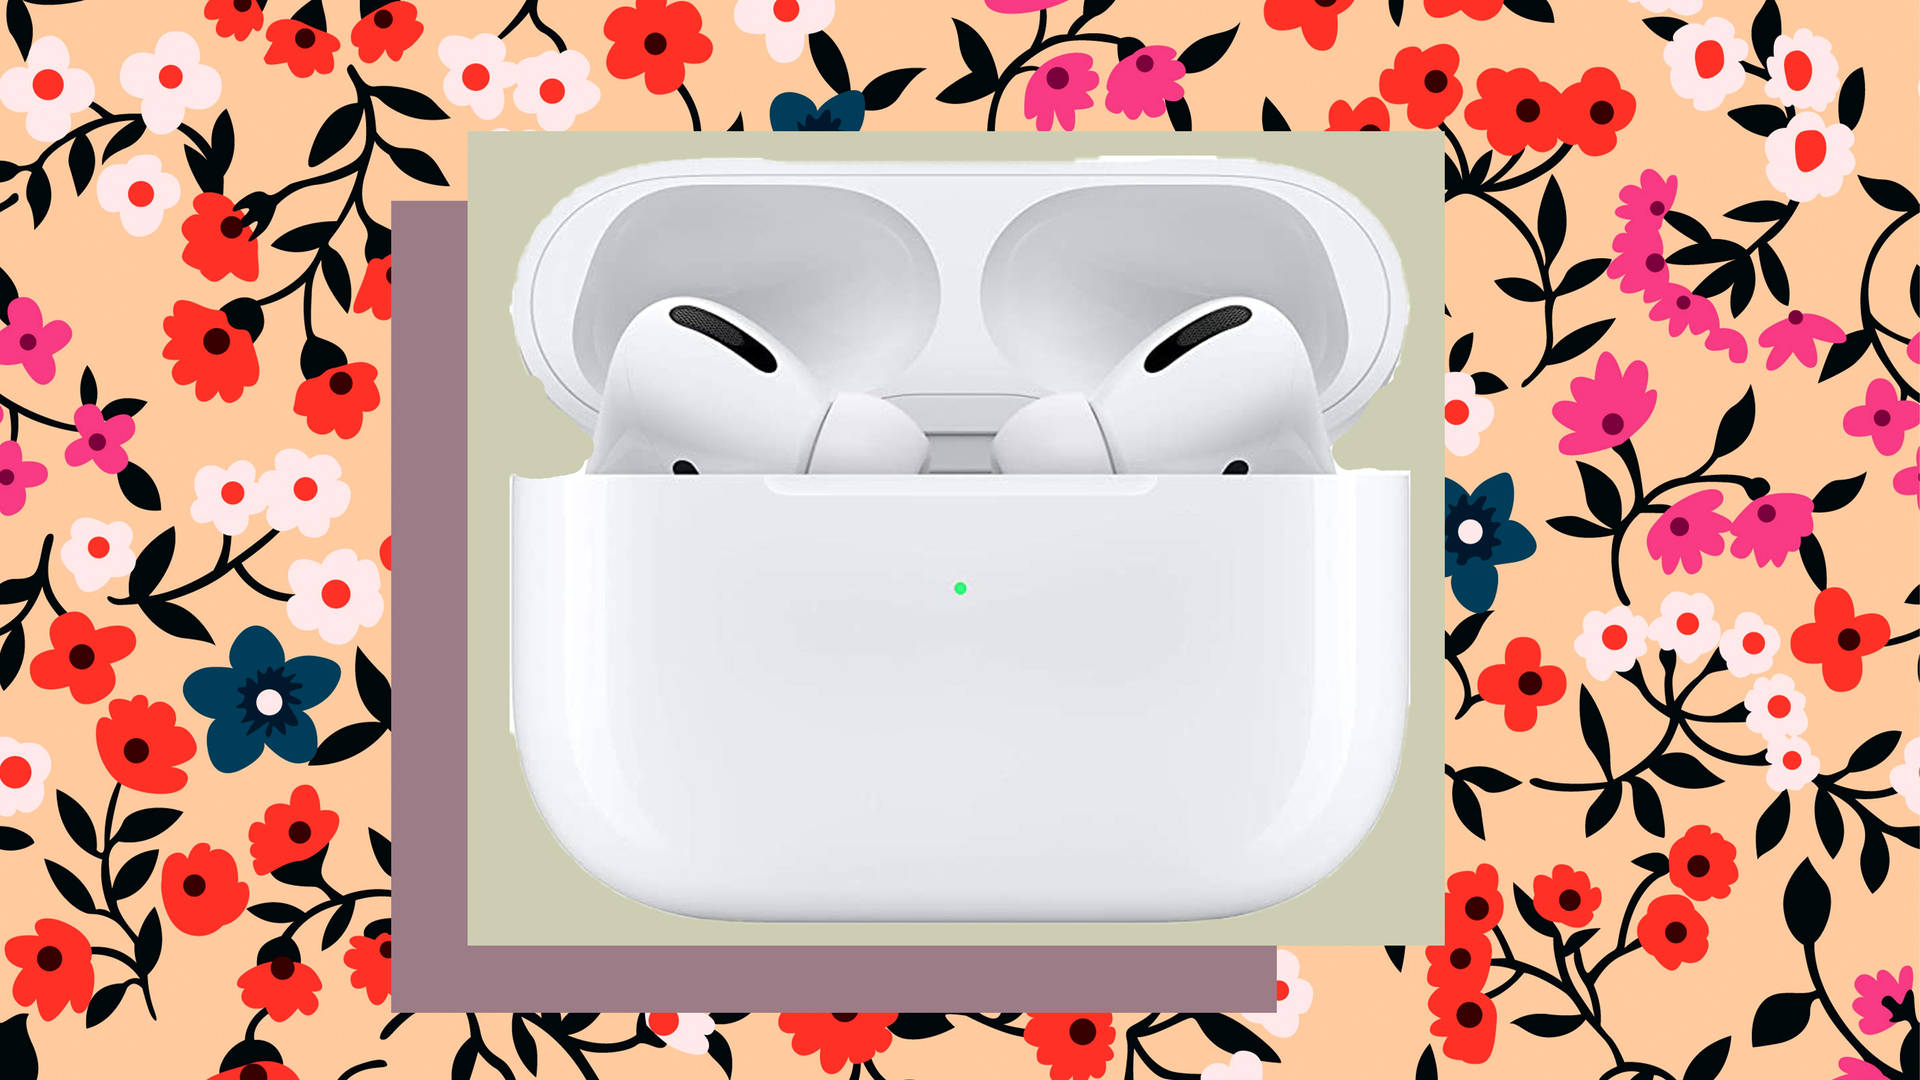 Airpods Pro With Floral Background